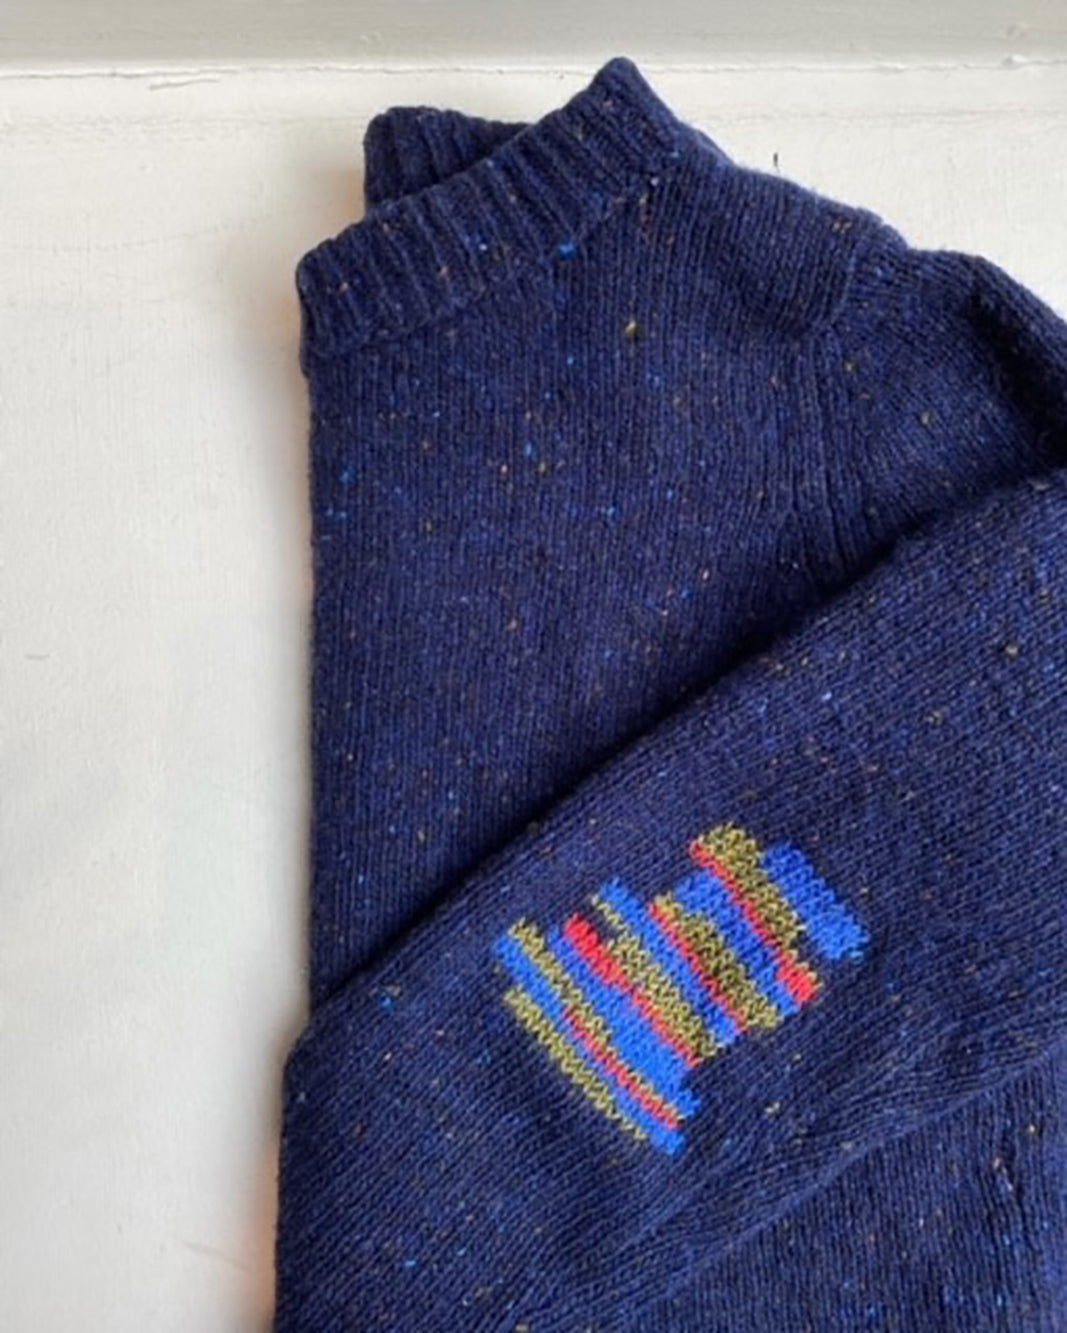 Woven Darning Workshop with Emily Mae Martin